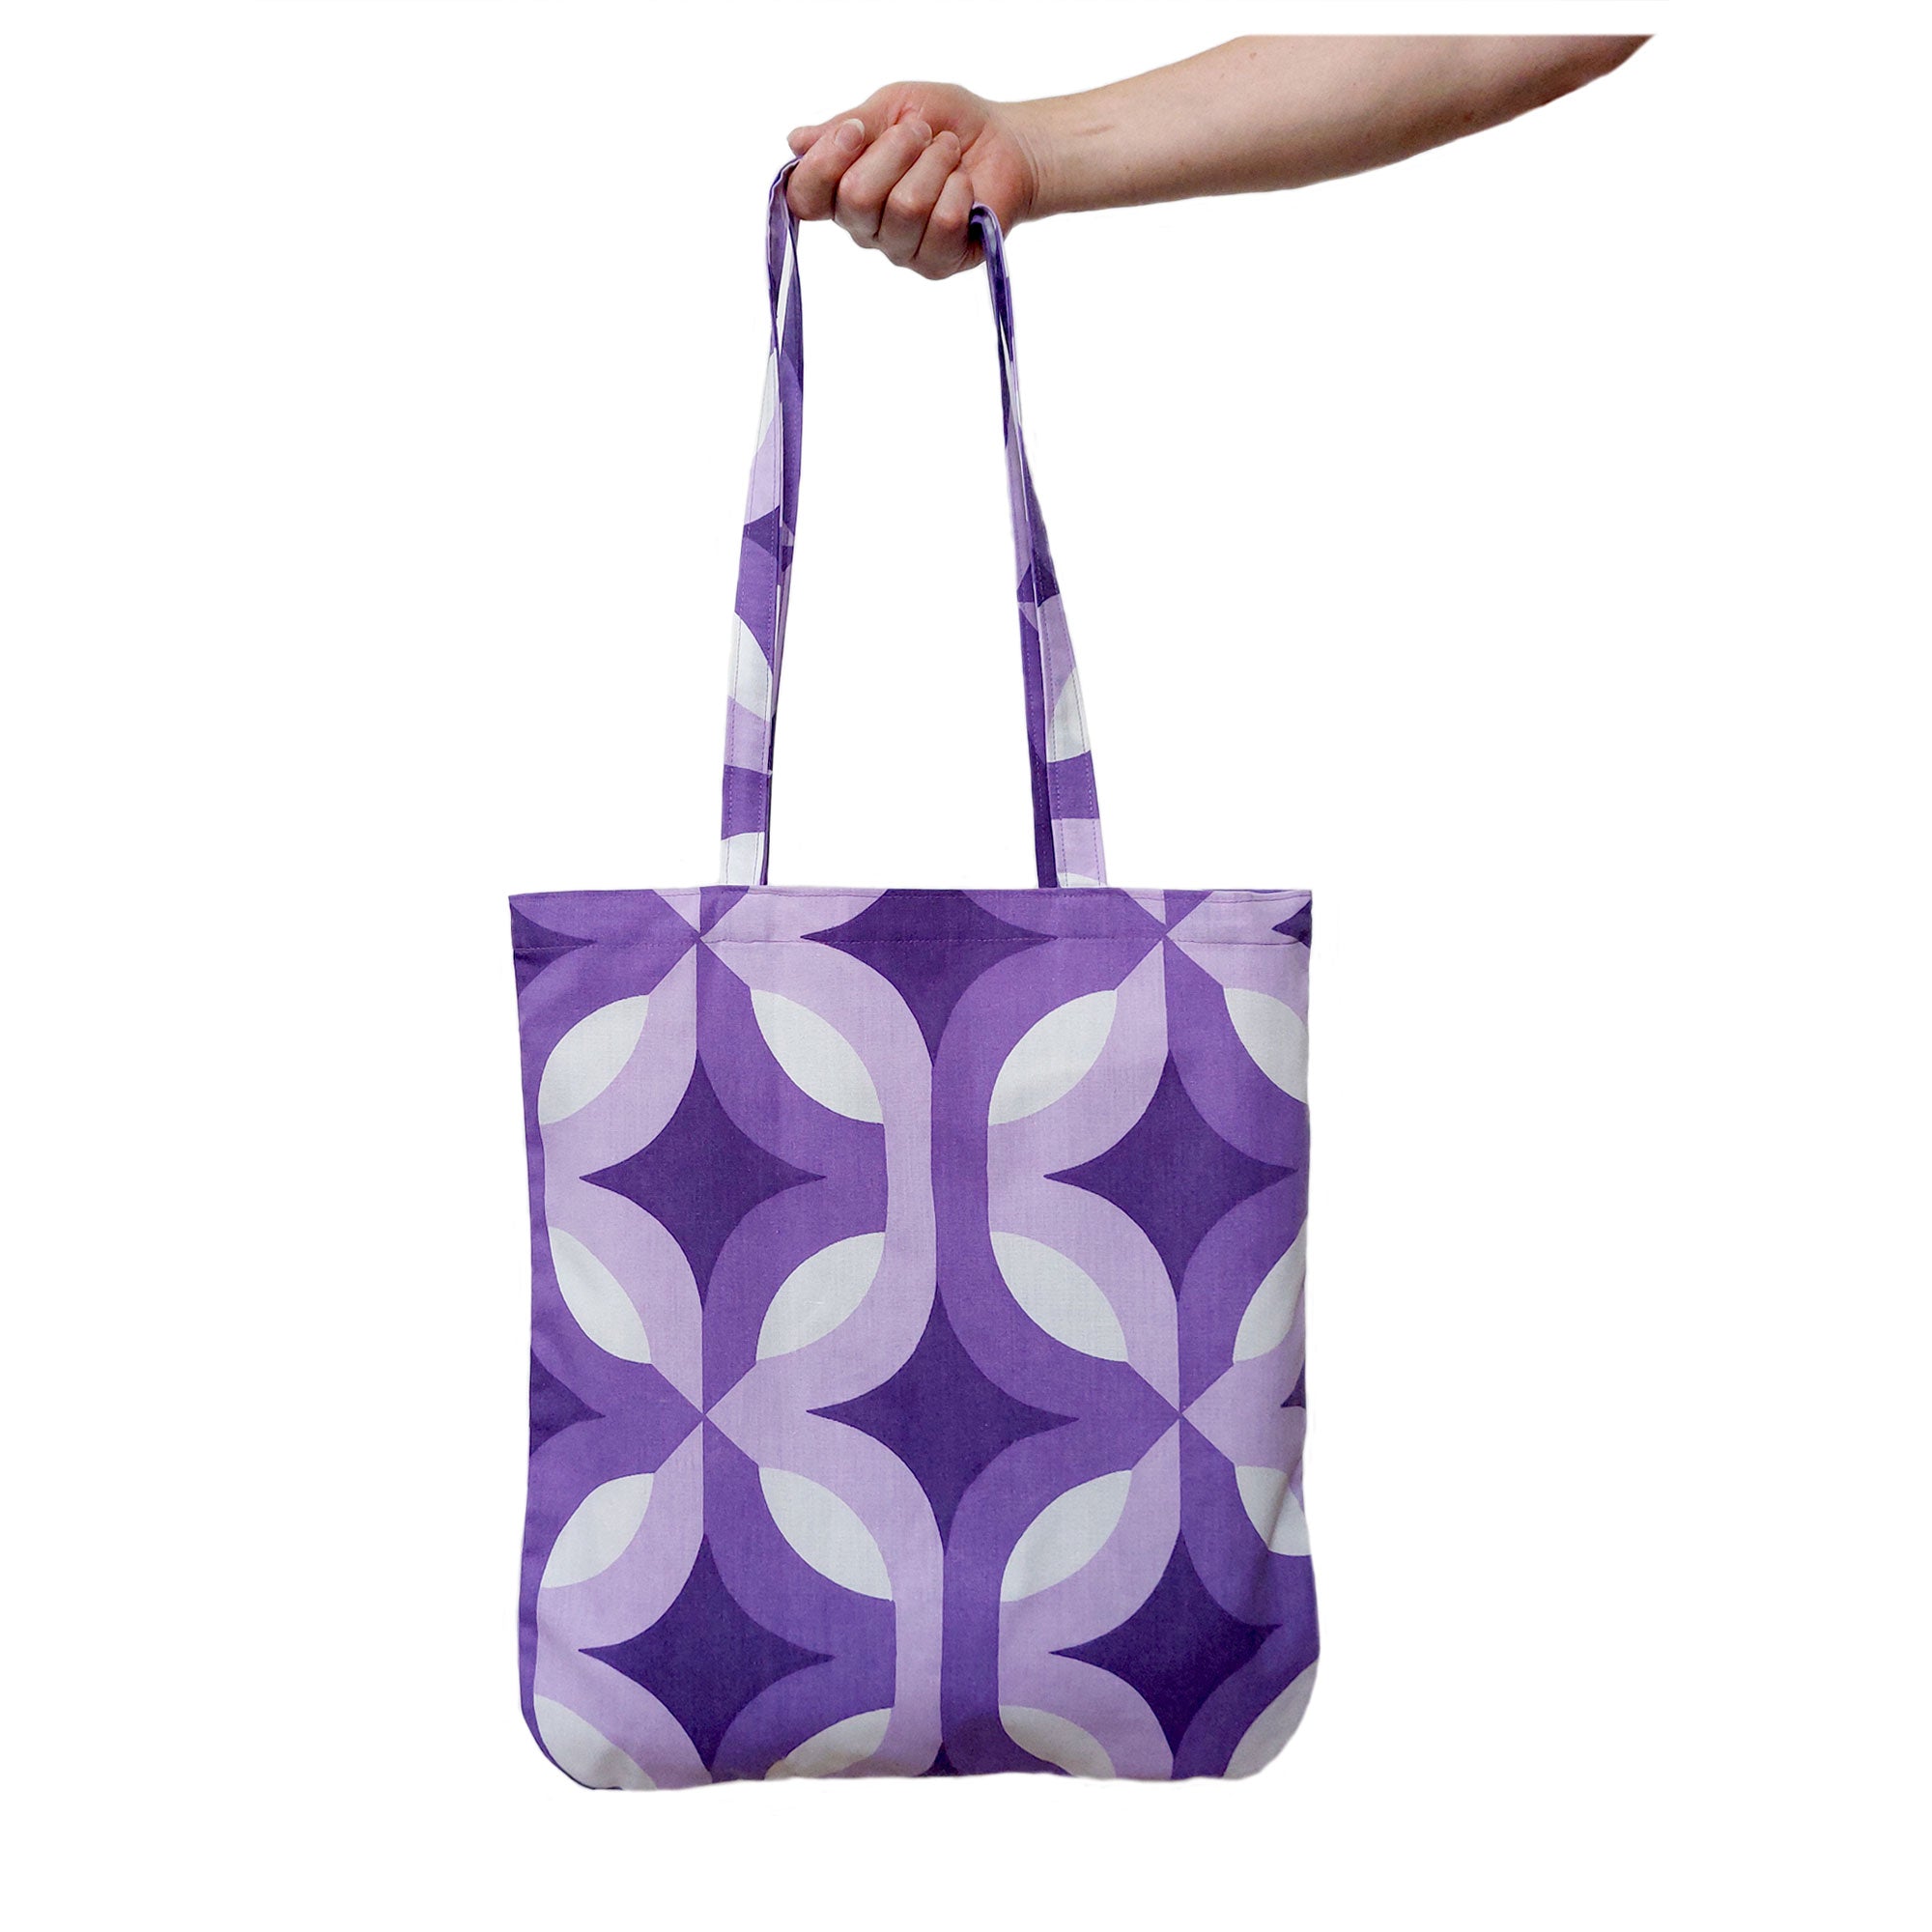 A handmade tote bag, made from vintage 70s fabric, with an Op Art pattern in purple & white, is held against a white backgound | The Inkabilly Emporium